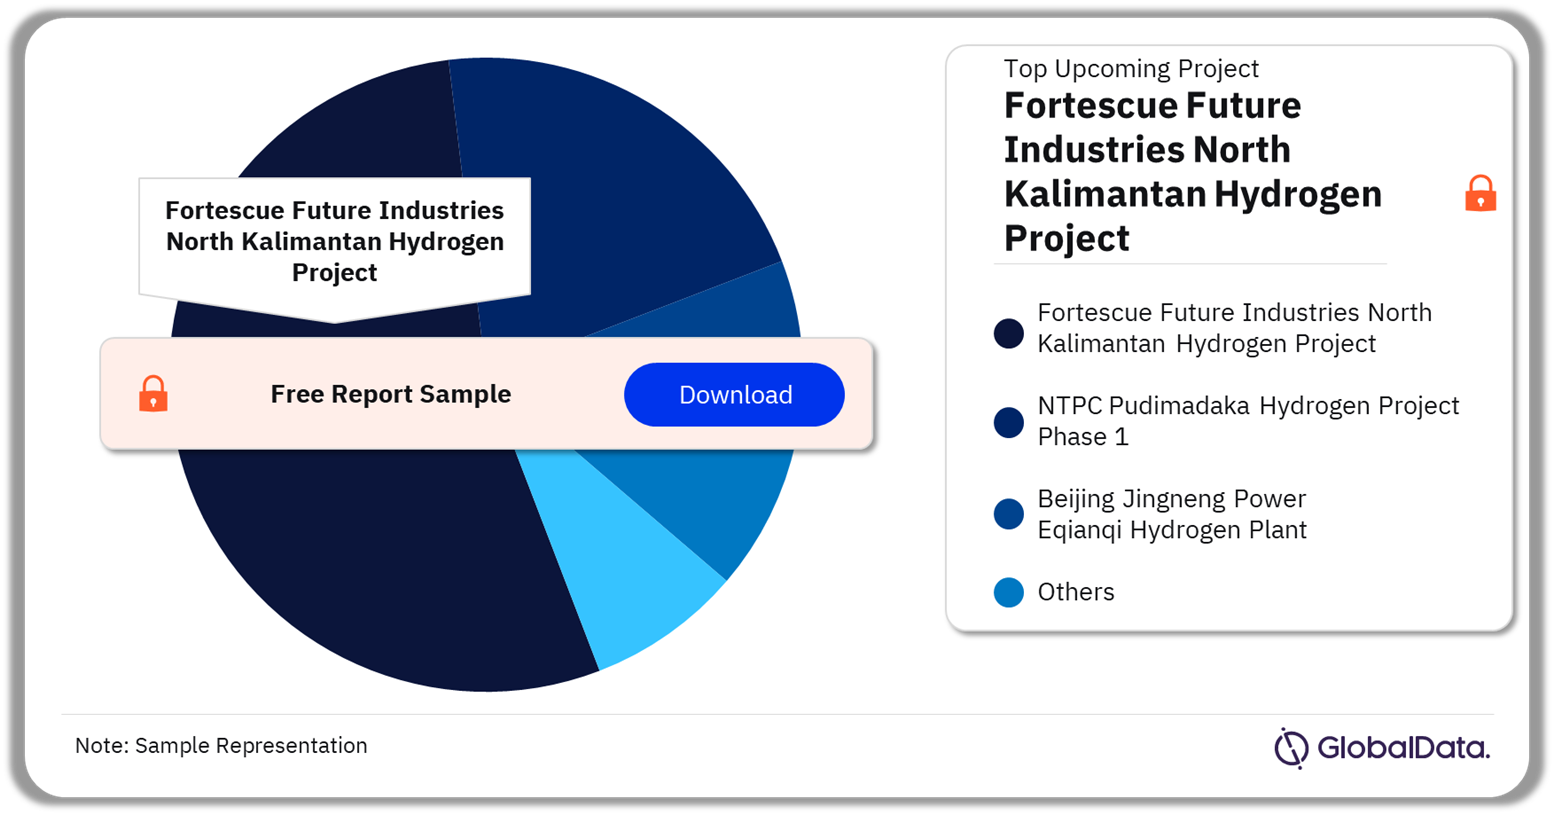 Asia Hydrogen Market Analysis by Upcoming Hydrogen Project